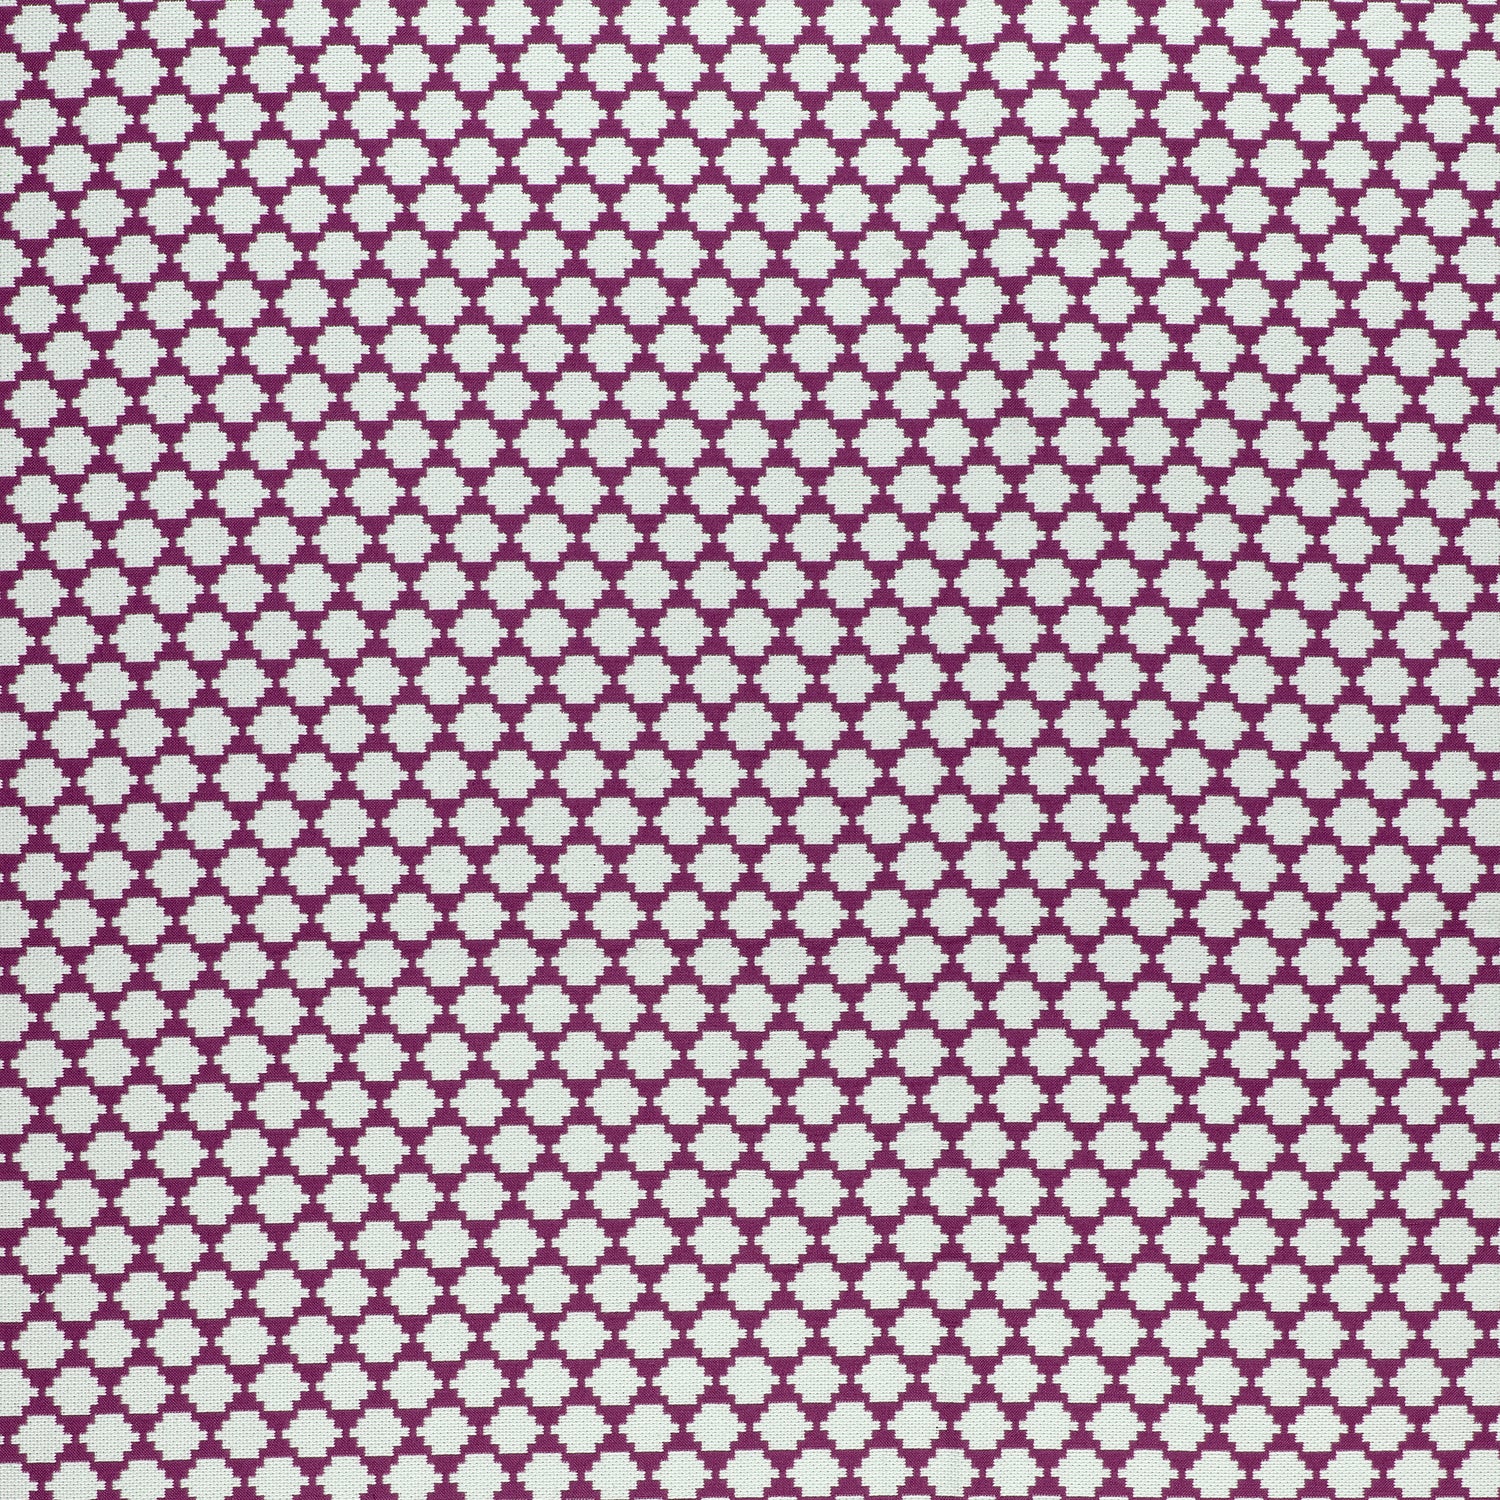 Bijou fabric in eggplant color - pattern number W775447 - by Thibaut in the Dynasty collection